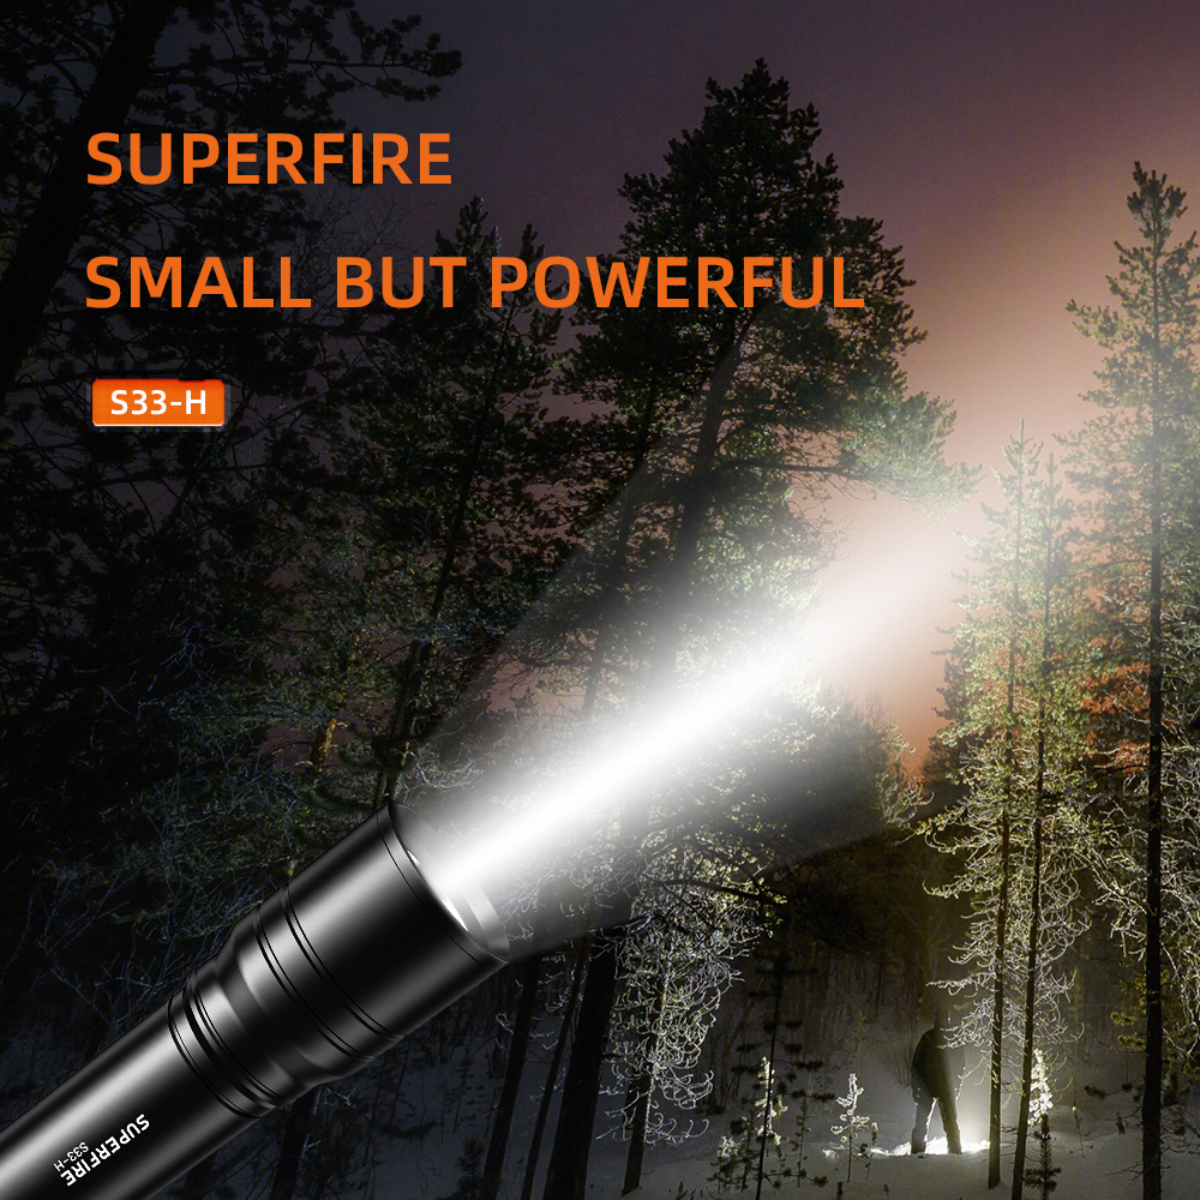 Superfire's Rechargeable Small Flashlight: Perfect For All Your Outdoor Needs